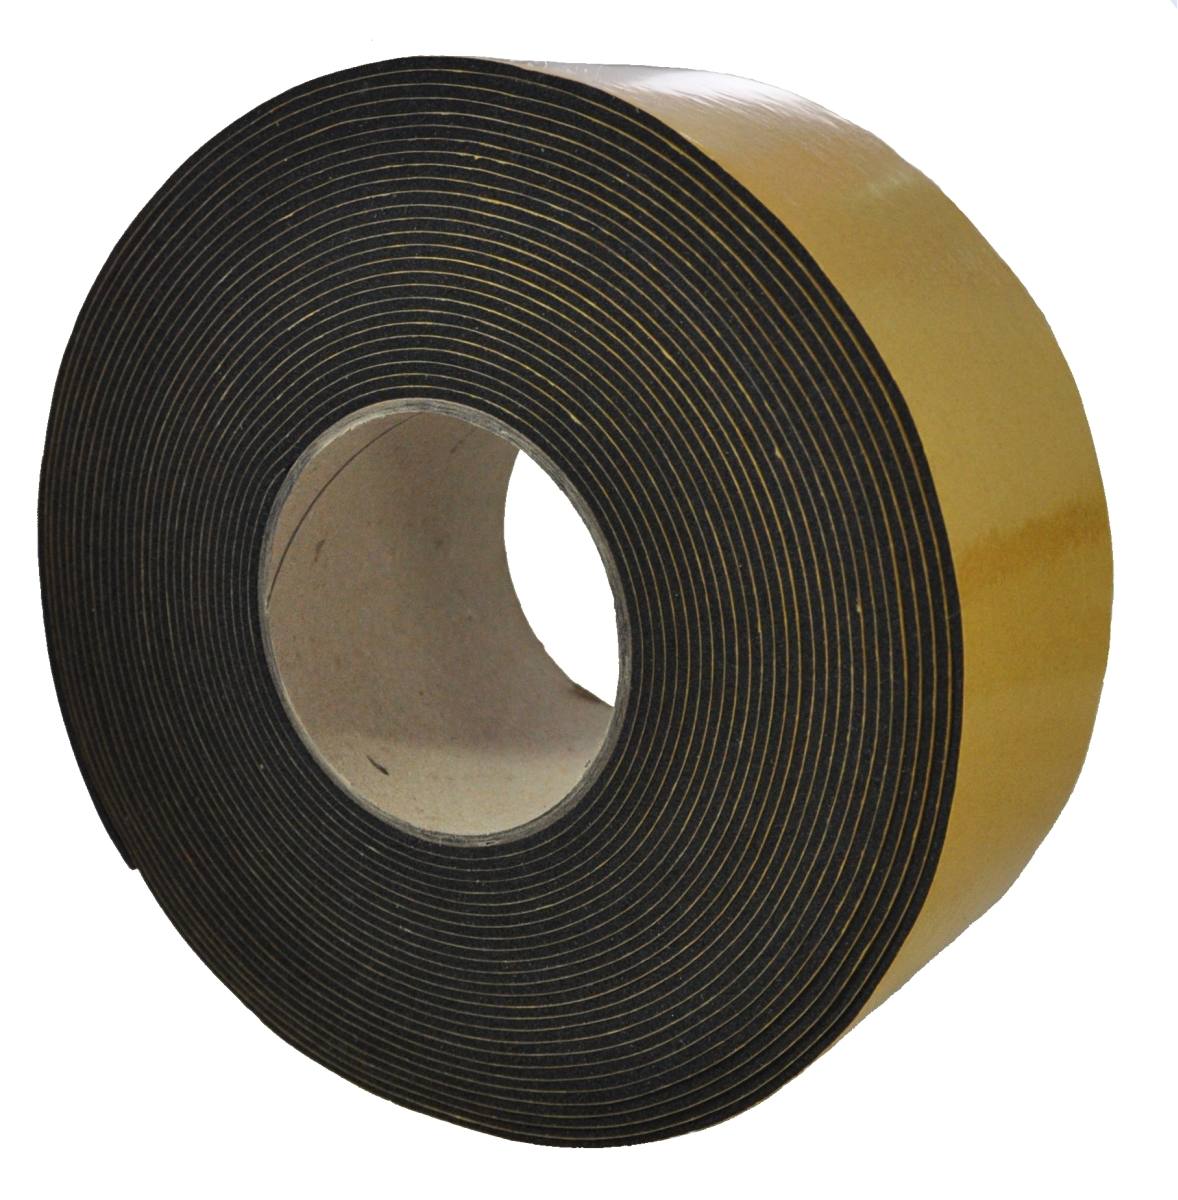 S-K-S EPDM 1mmx12mmx10m black self-adhesive on one side